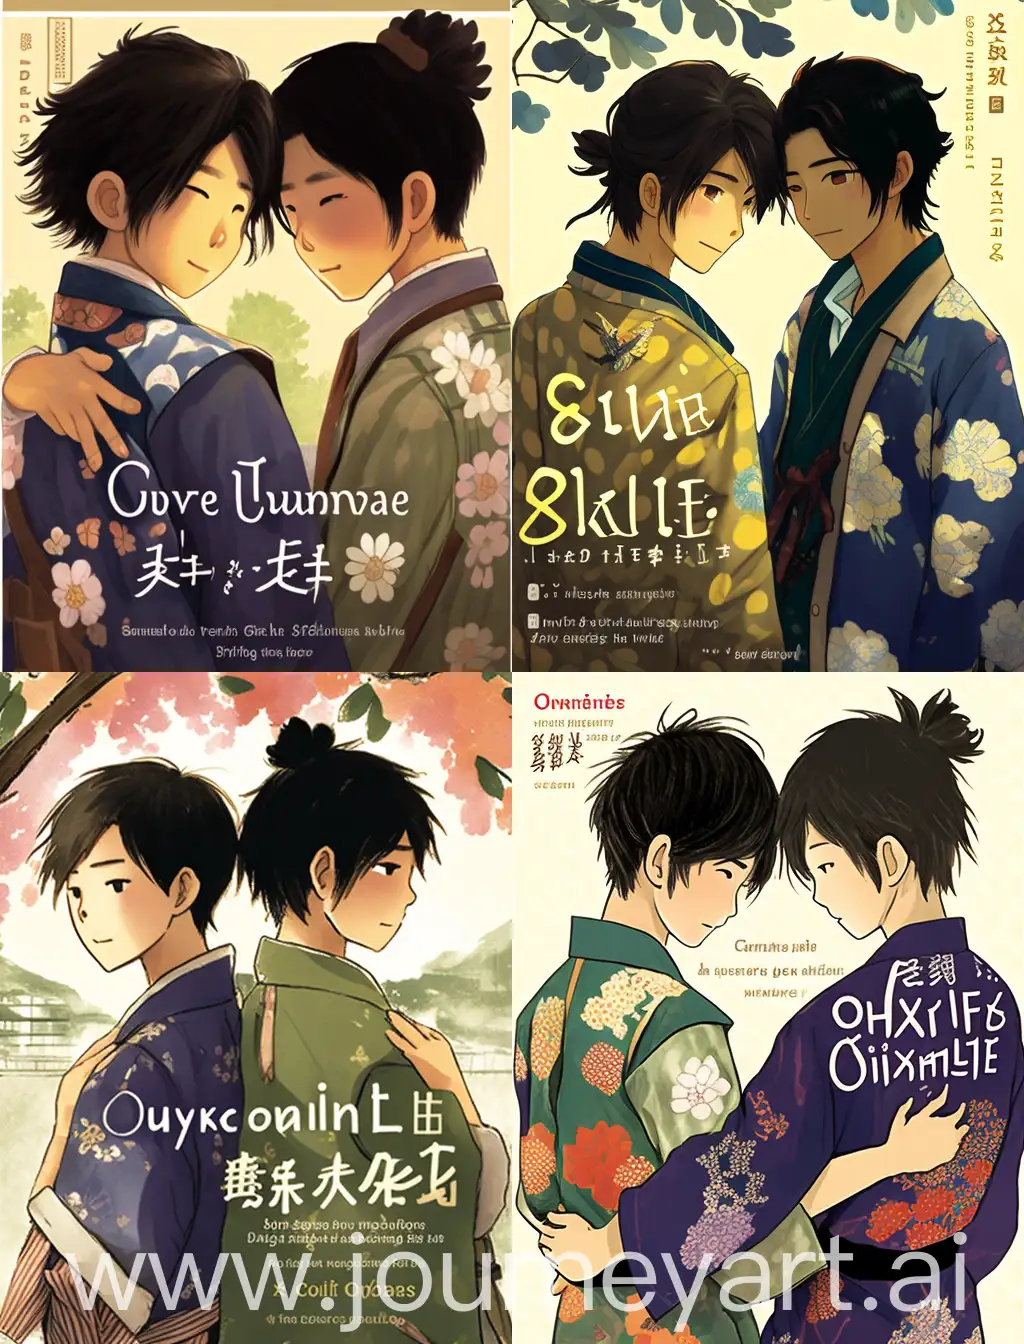 Japanese style, two 15-year-old Japanese boyfriends in old kimonos affectionately put their arms around each other's shoulders. Dark hair, Japan has a rich tradition of storytelling and whimsy. Create a collaborative story that incorporates elements of these artistic styles: the turbulent past and the tenacious spirit of the Japanese people, the innocent and free touch of children's drawings, pencil scribbles and hand paintings, the hazy backdrop of the Japanese countryside, and the rustic simplicity of the setting.
